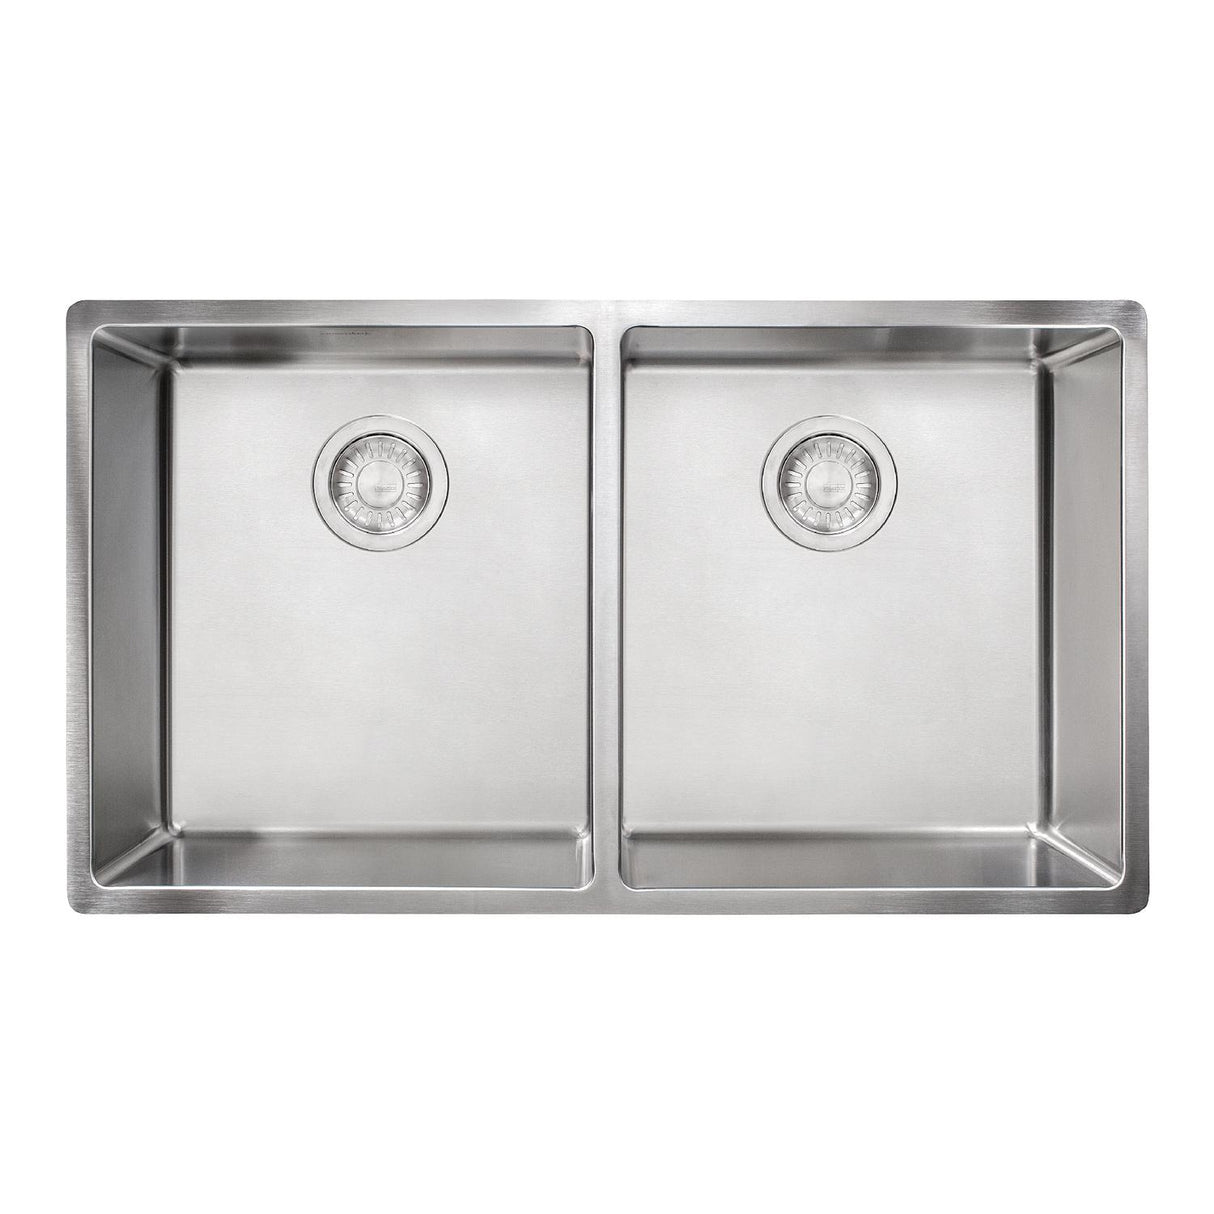 Franke CUX120 Sink, 32-Inch, Stainless Steel